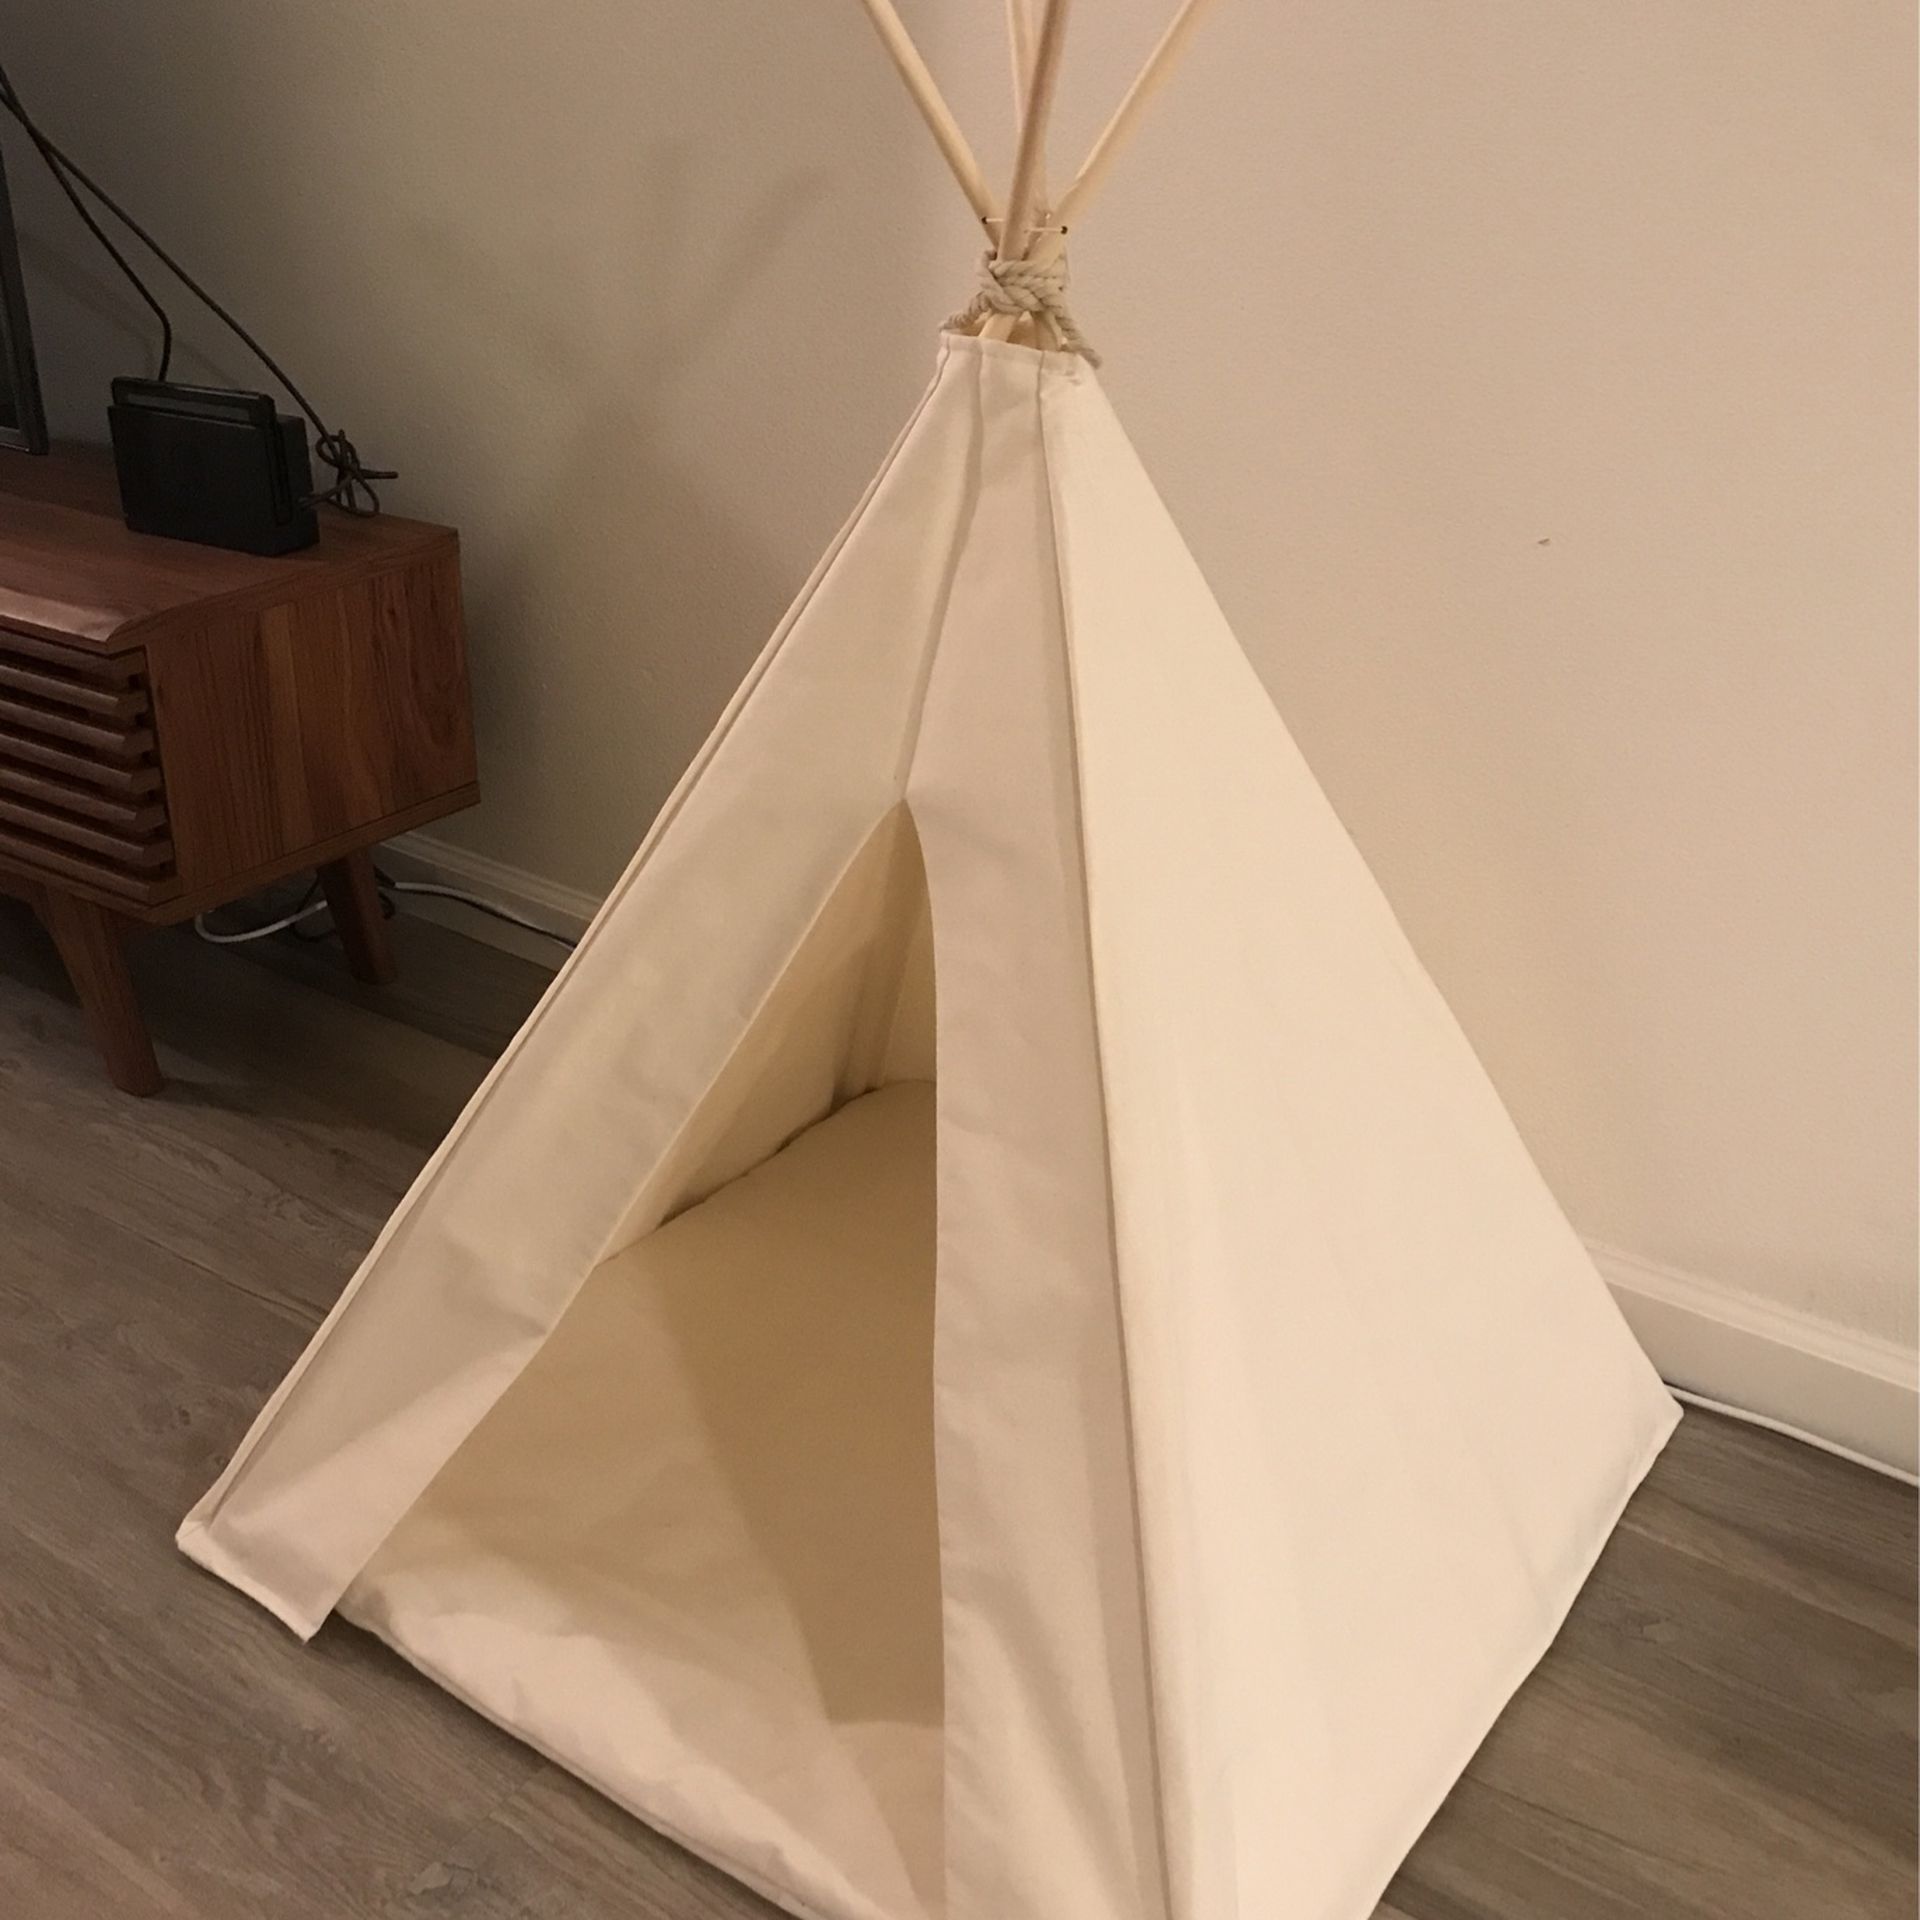 Dog Tent Bed - New